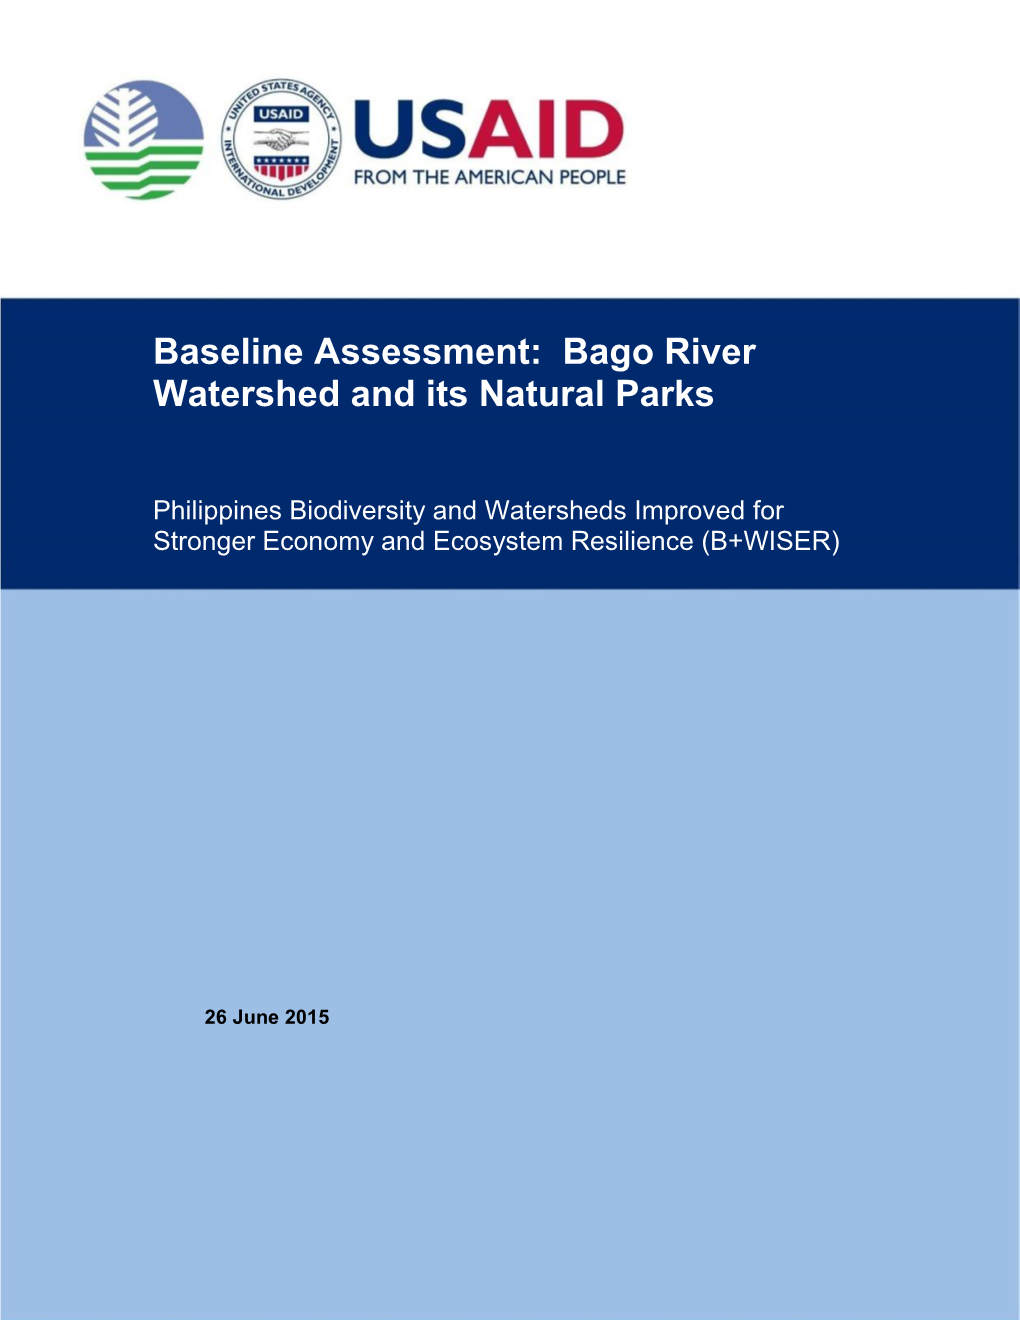 Baseline Assessment: Bago River Watershed and Its Natural Parks